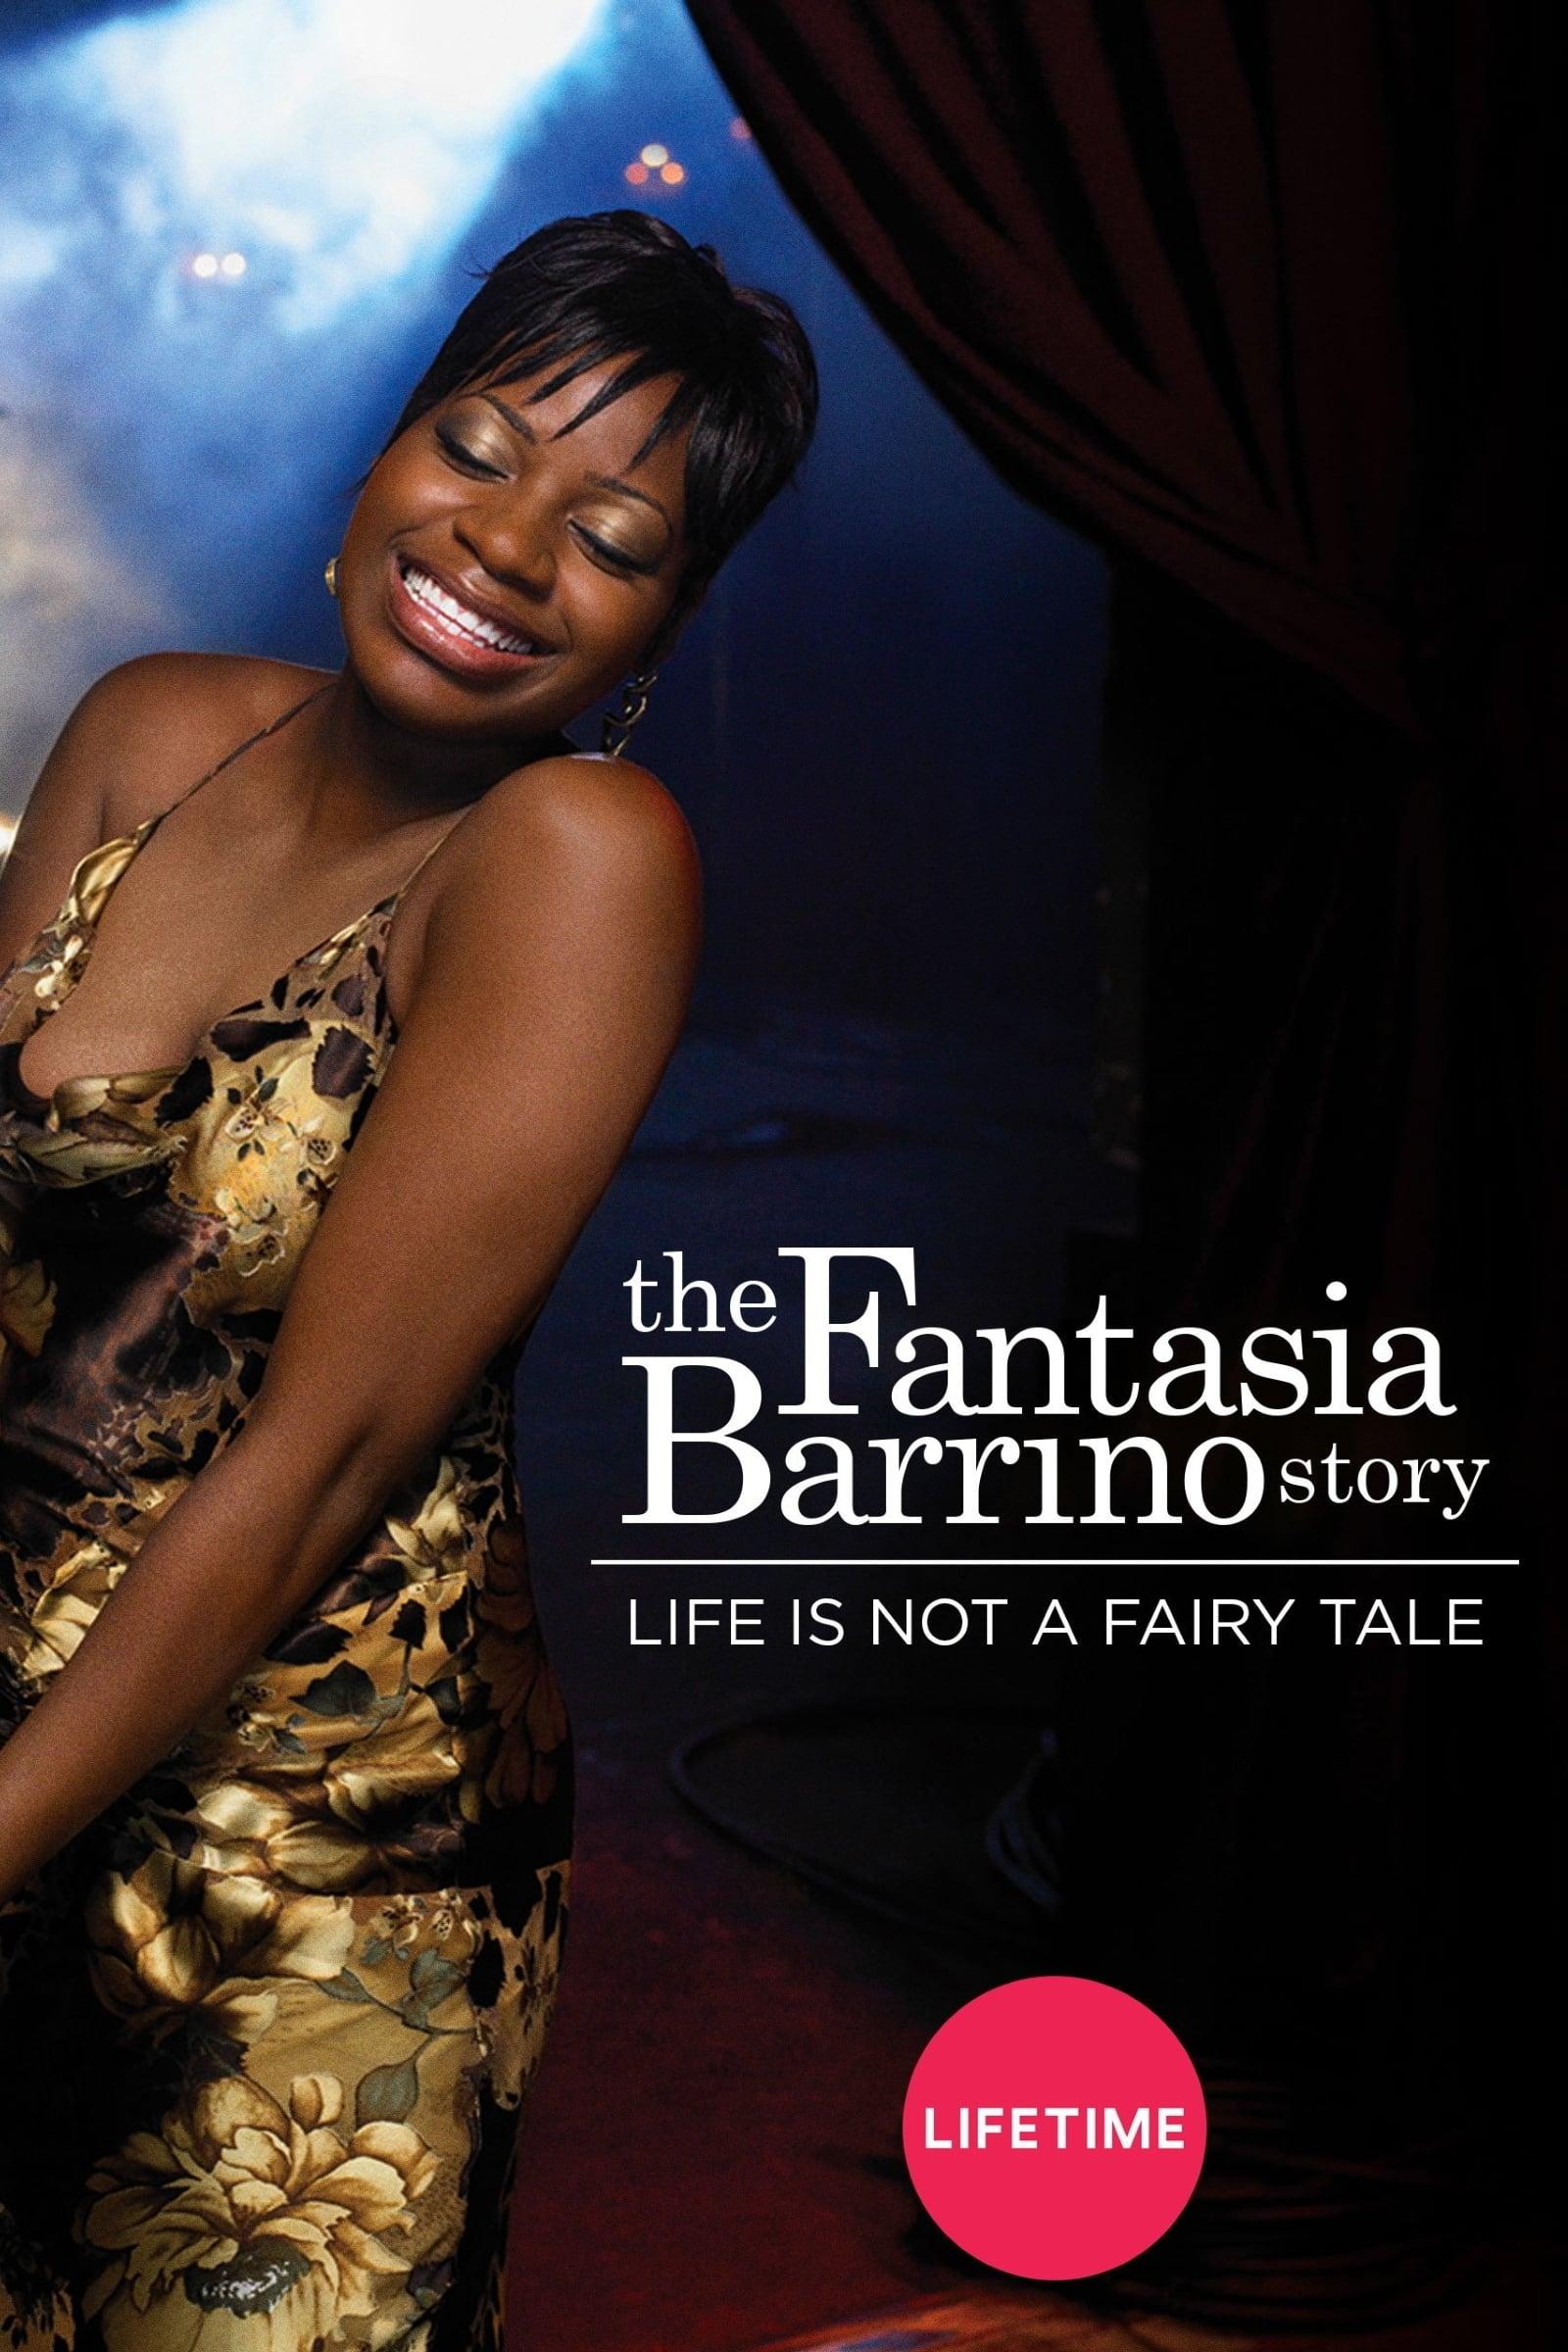 Life Is Not a Fairytale: The Fantasia Barrino Story poster